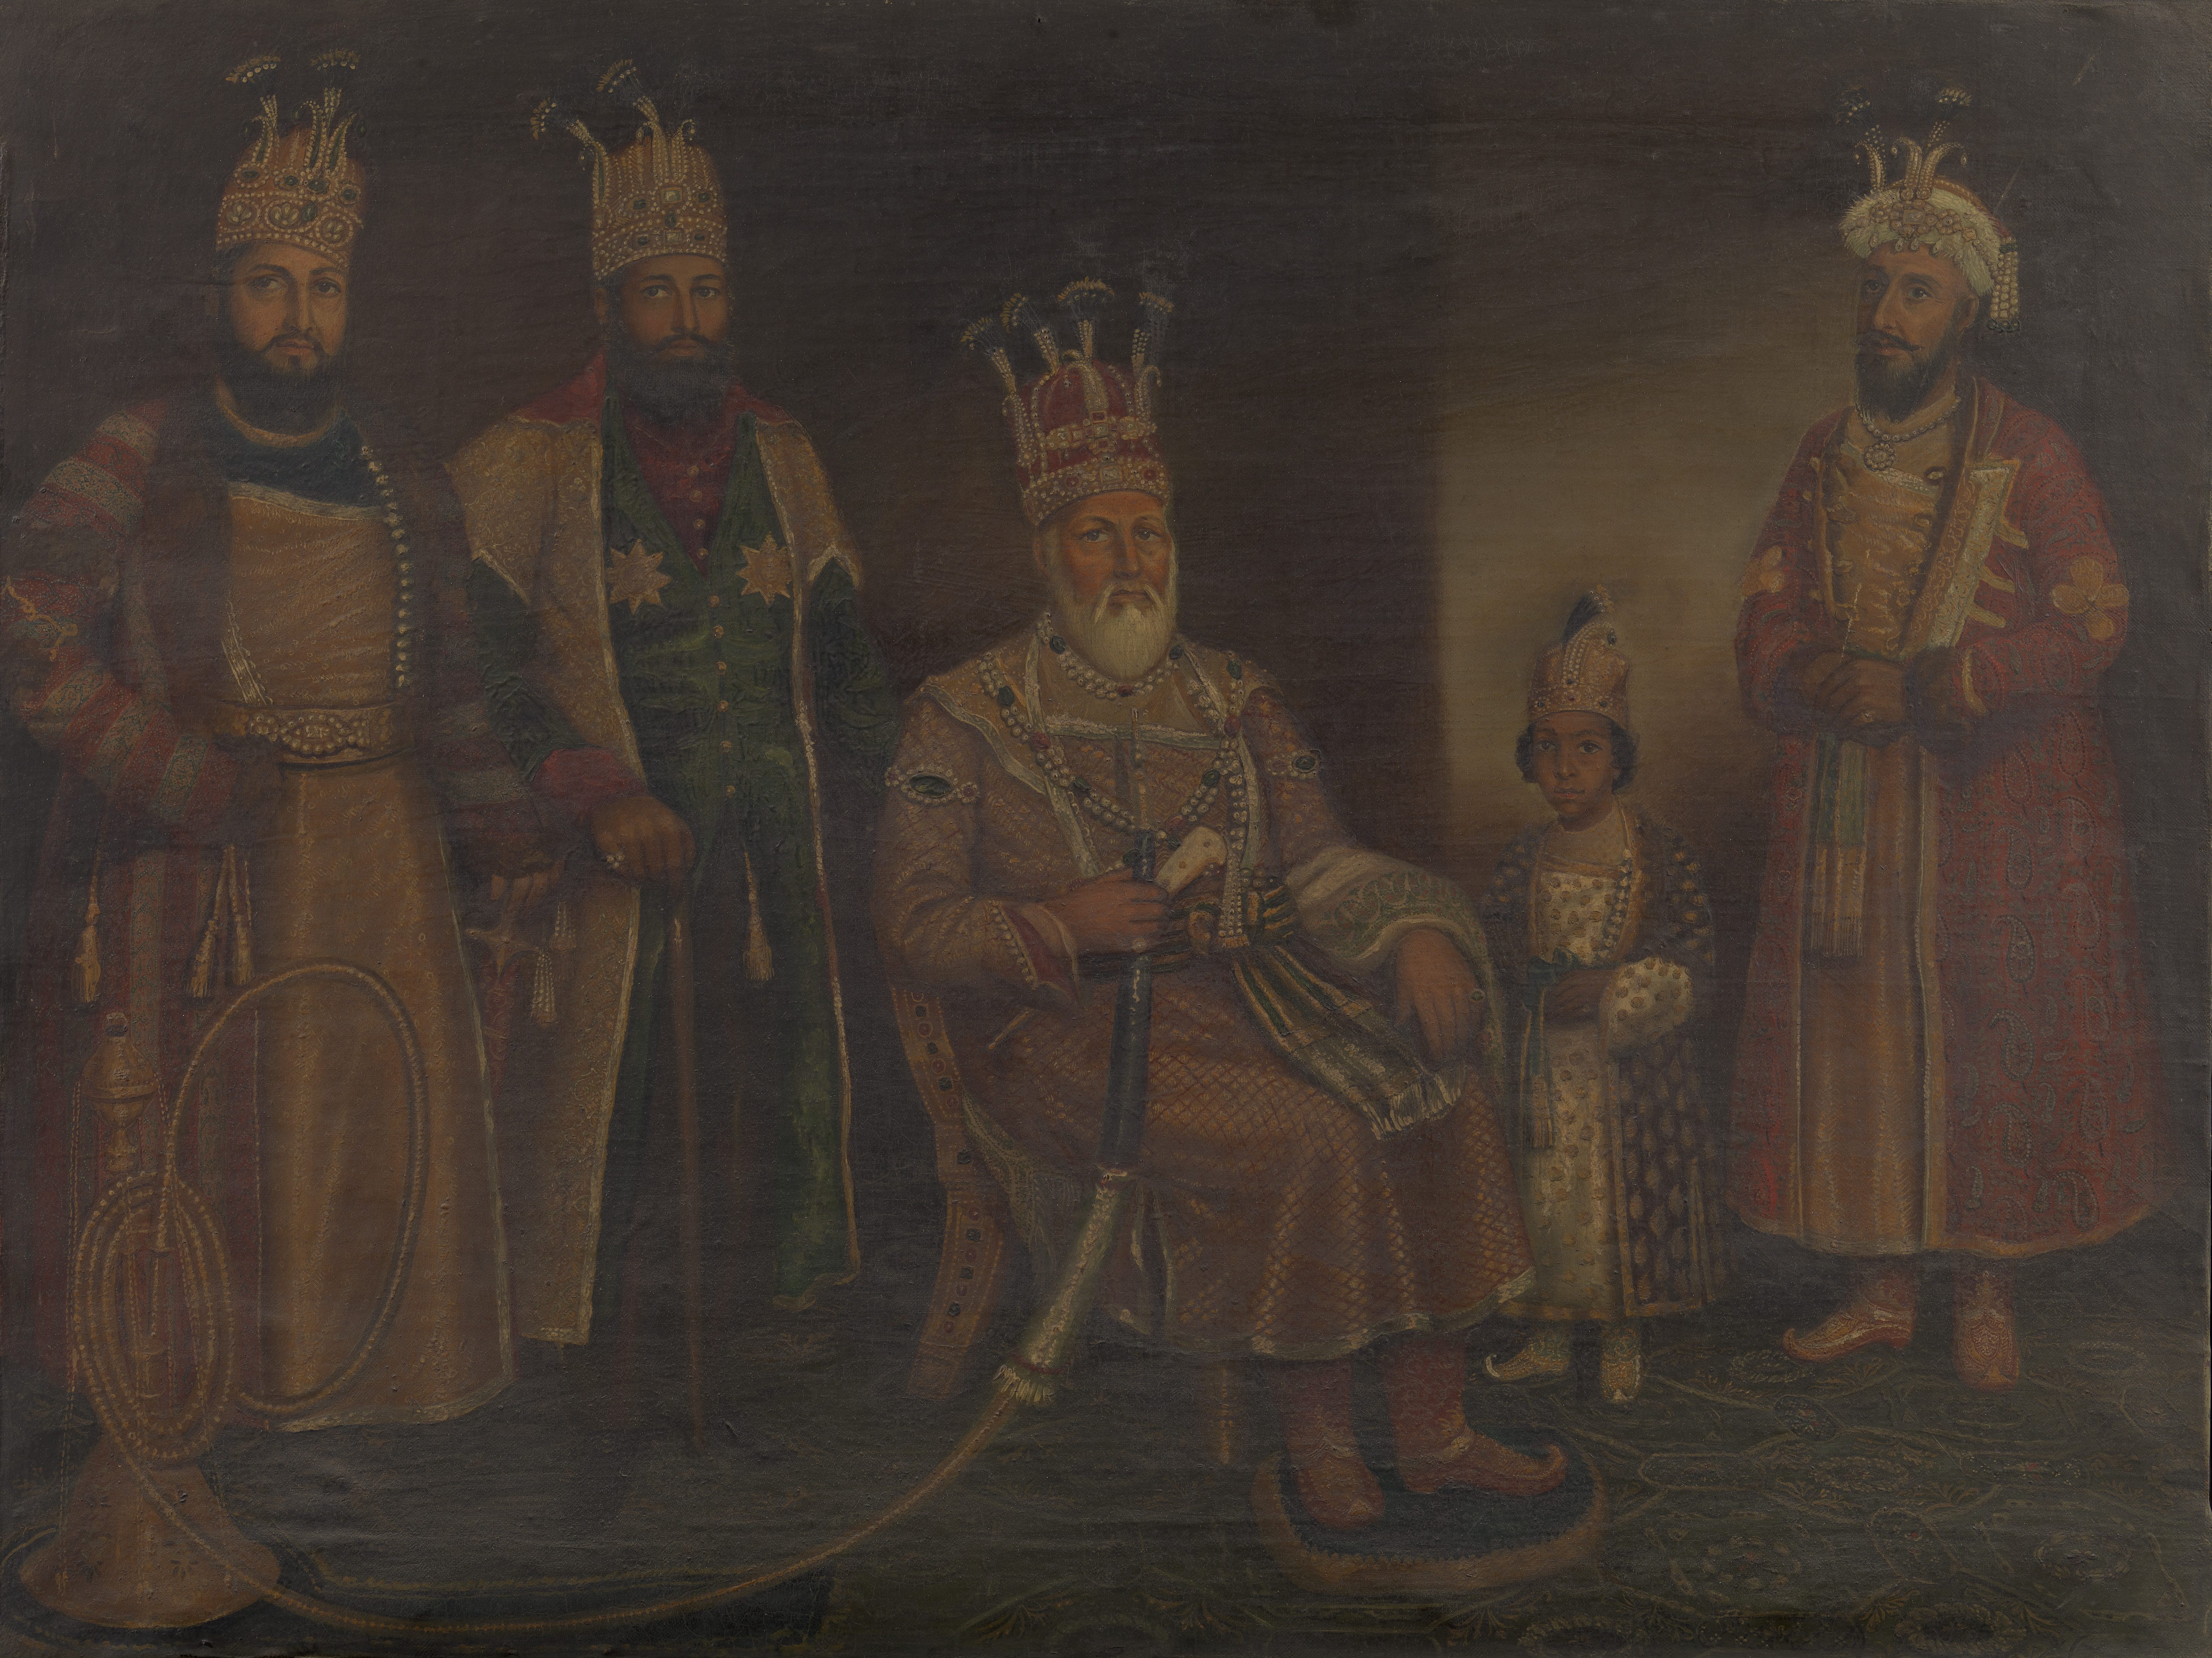 Mughal painting much darker before conservation treatment